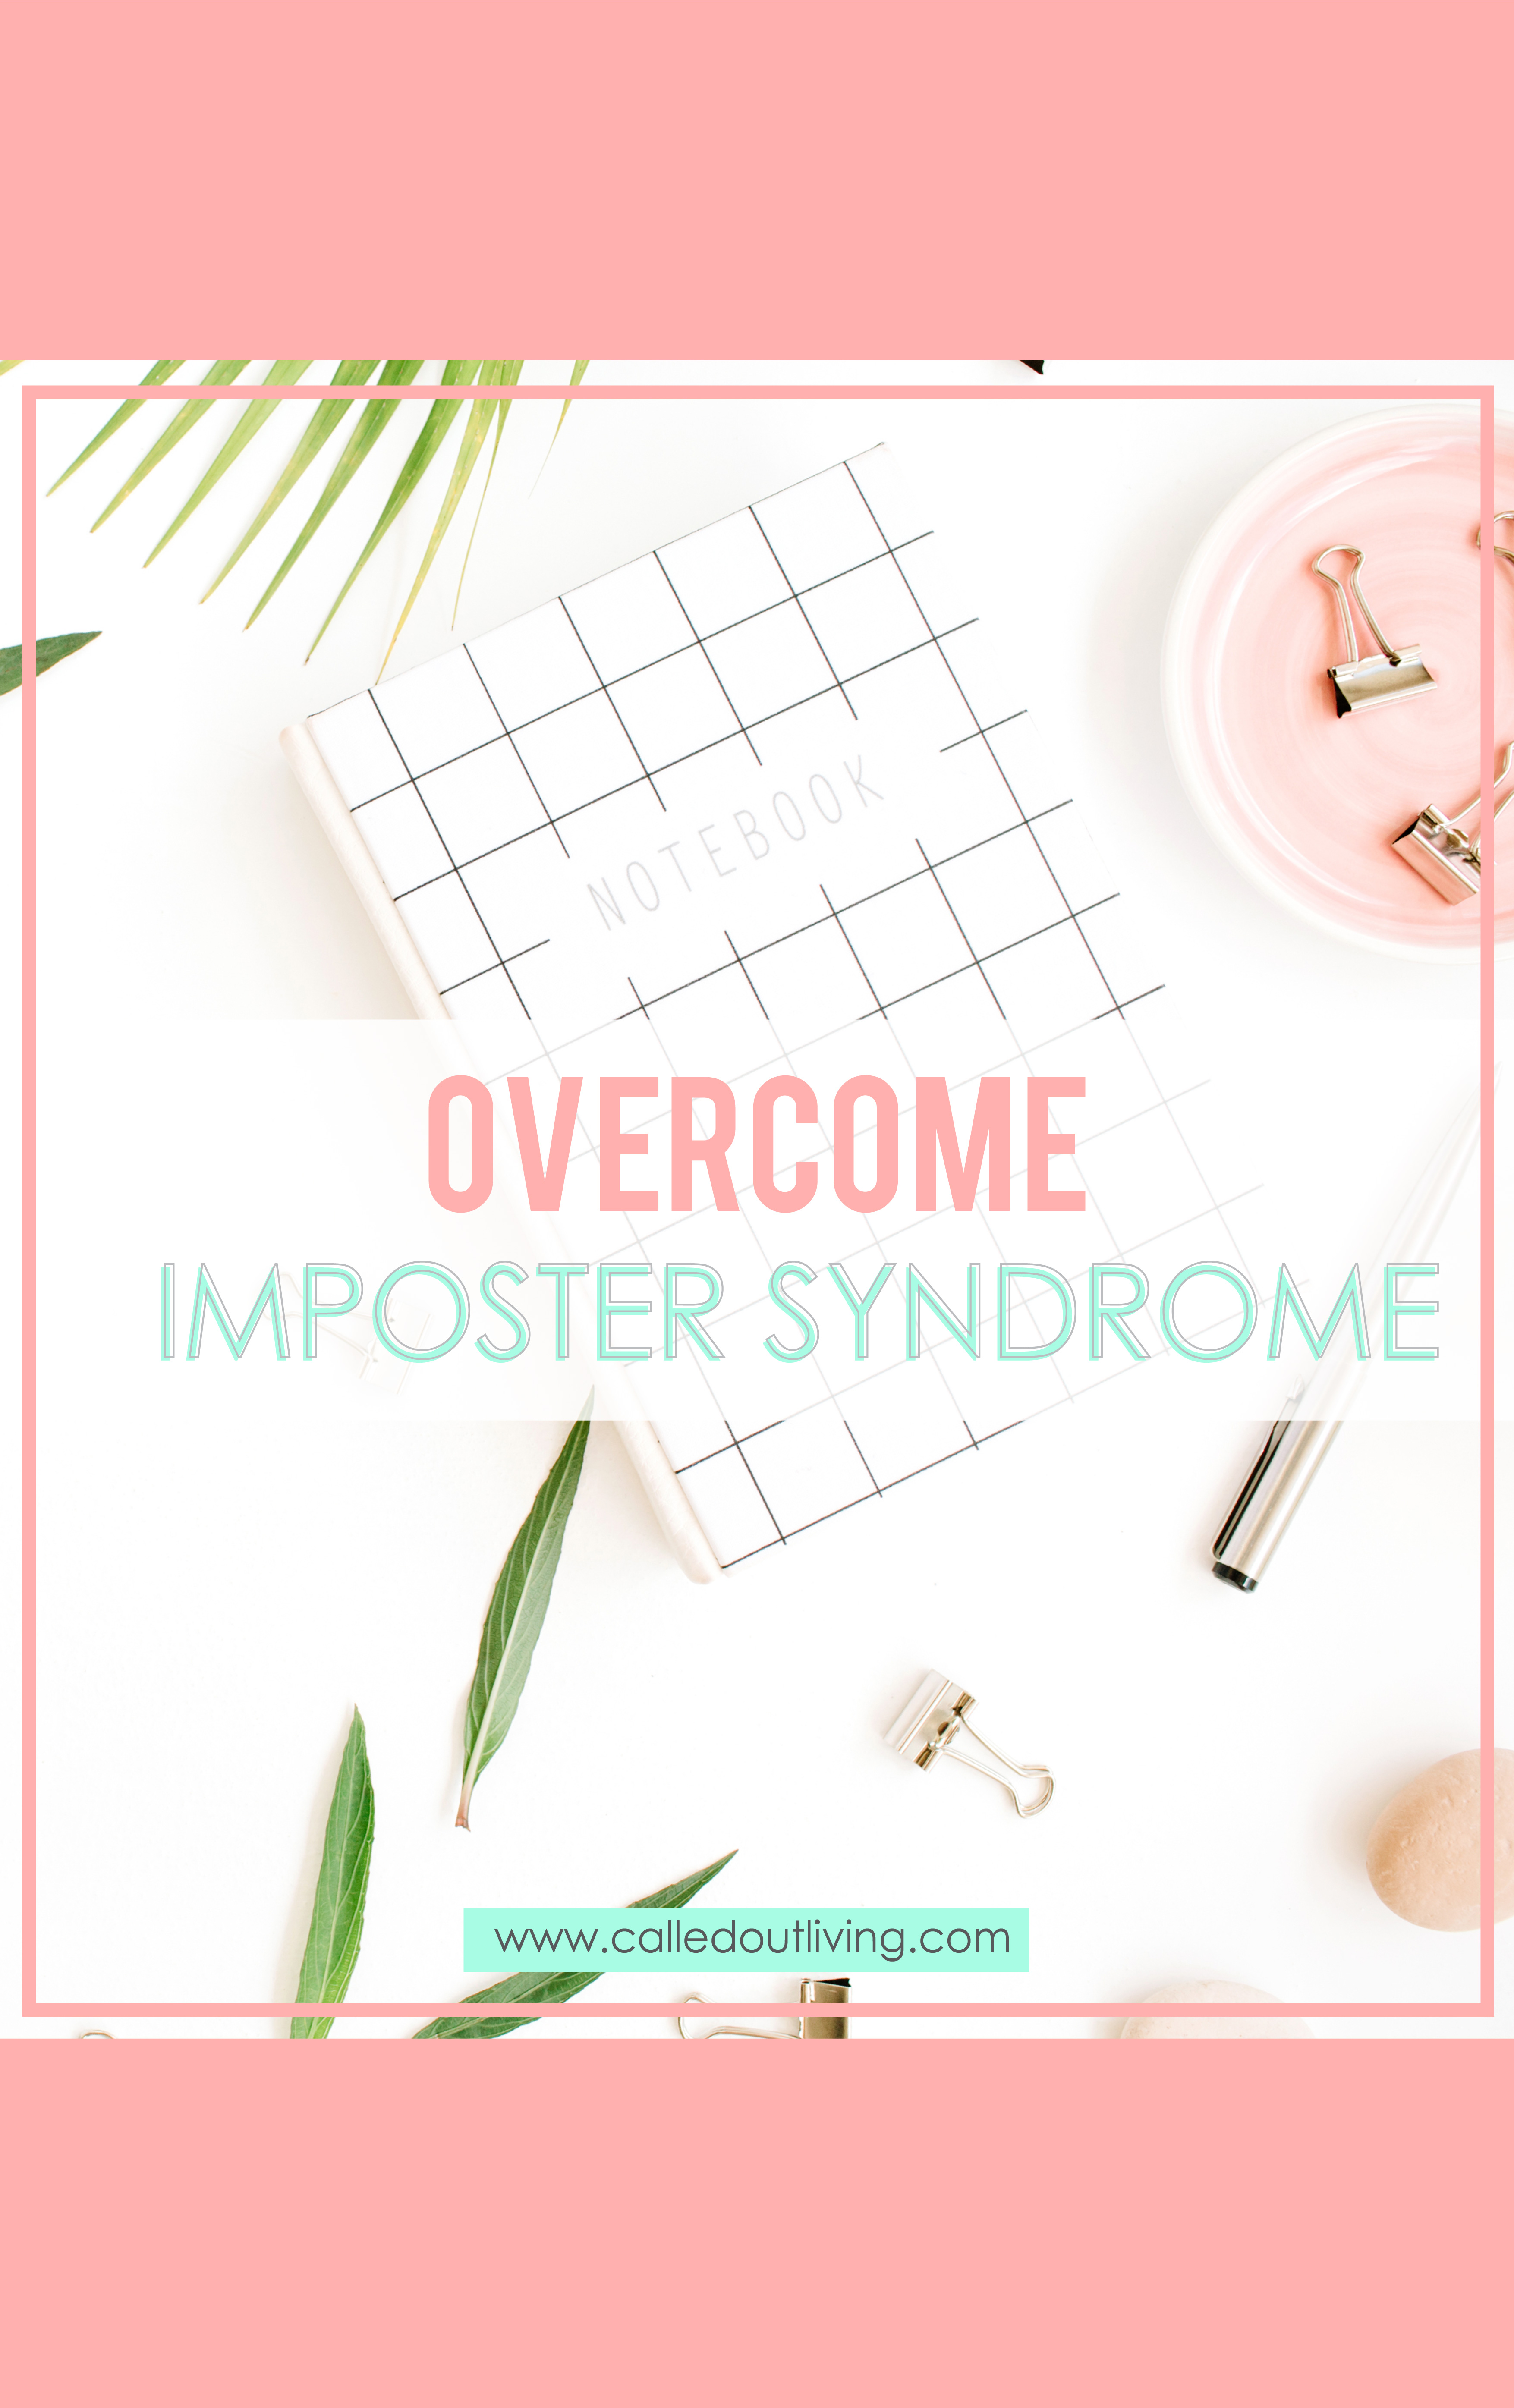 overcome imposter syndrome with these helpful tips, tricks and strategies. Imposter syndrome can have you feeling stuck, red these tips and start to change that. Move forward in your life, business and goals. change your mindset and develop a success mindset. #impostersyndrome #overcomeimpostersyndrome #blogger #millenialmindset #millenialblogger